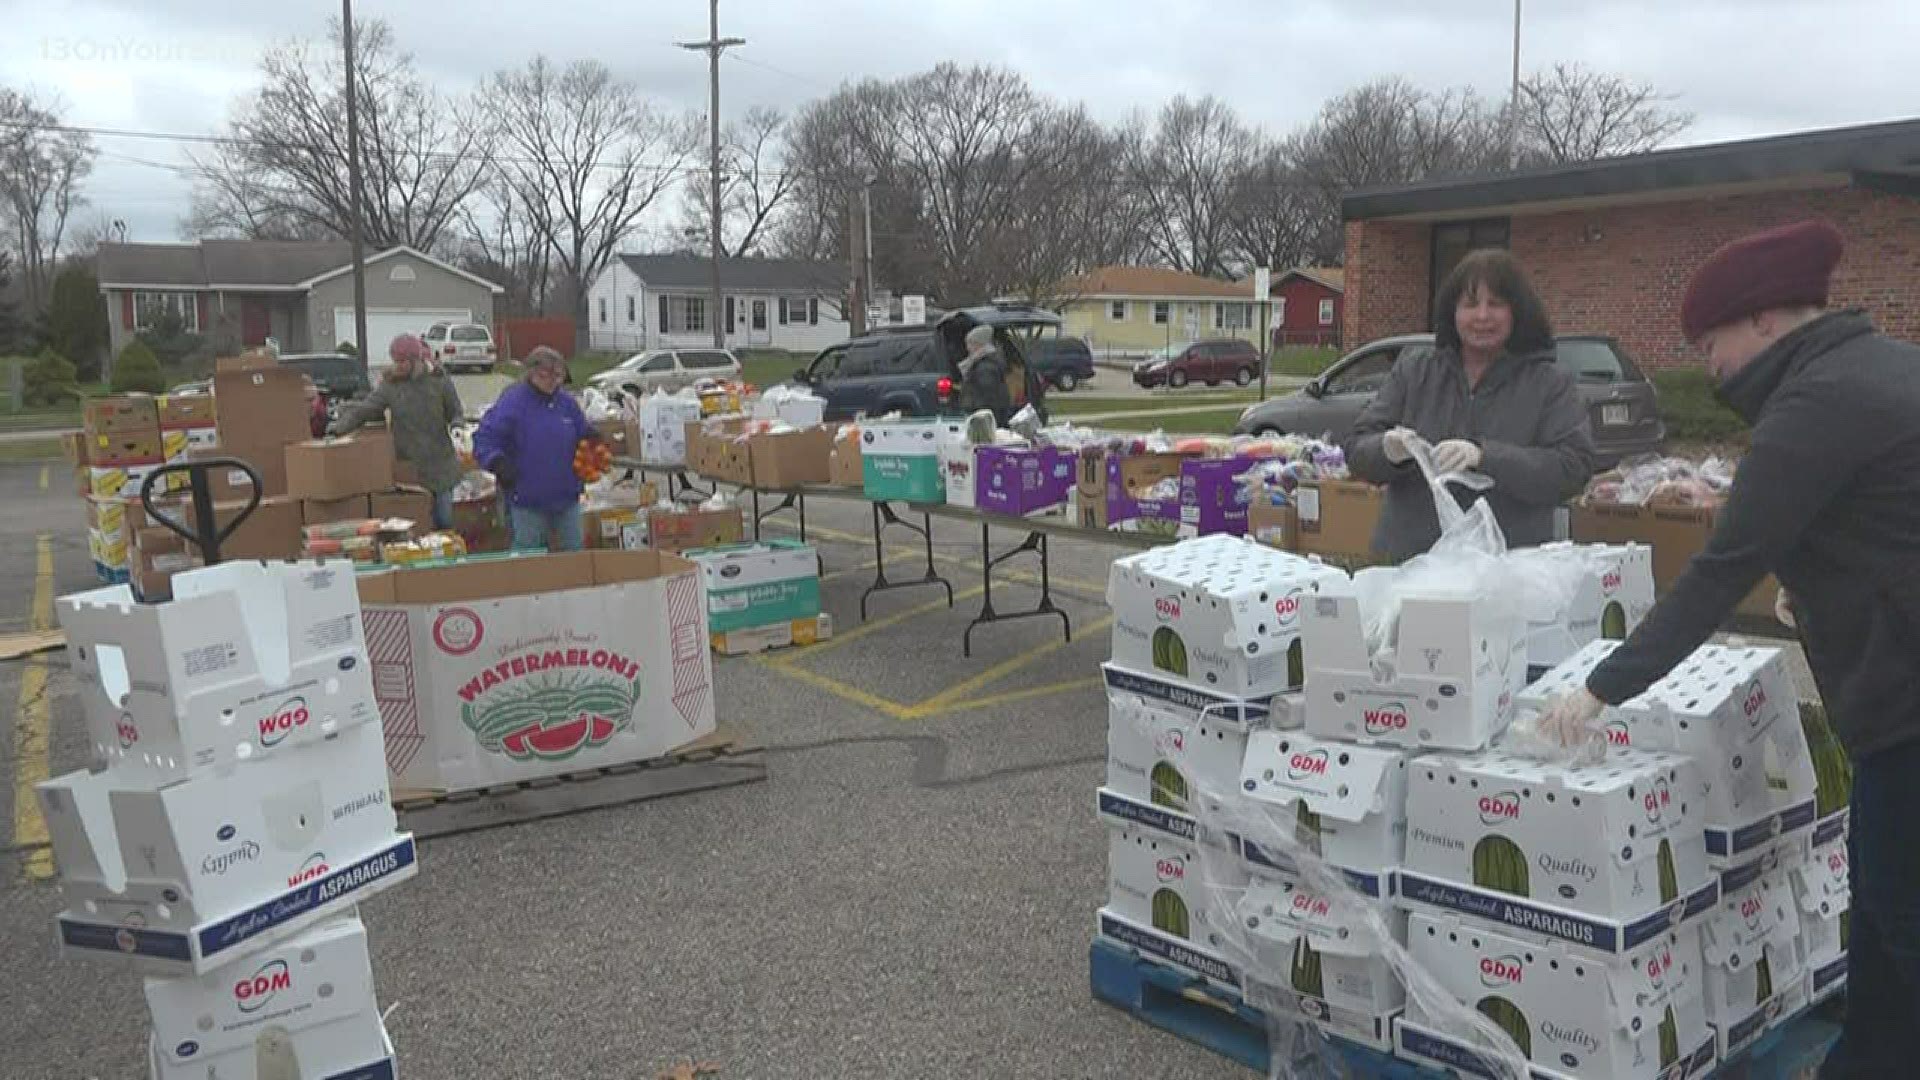 13 ON YOUR SIDE has partnered with Feeding America West Michigan to help our community.